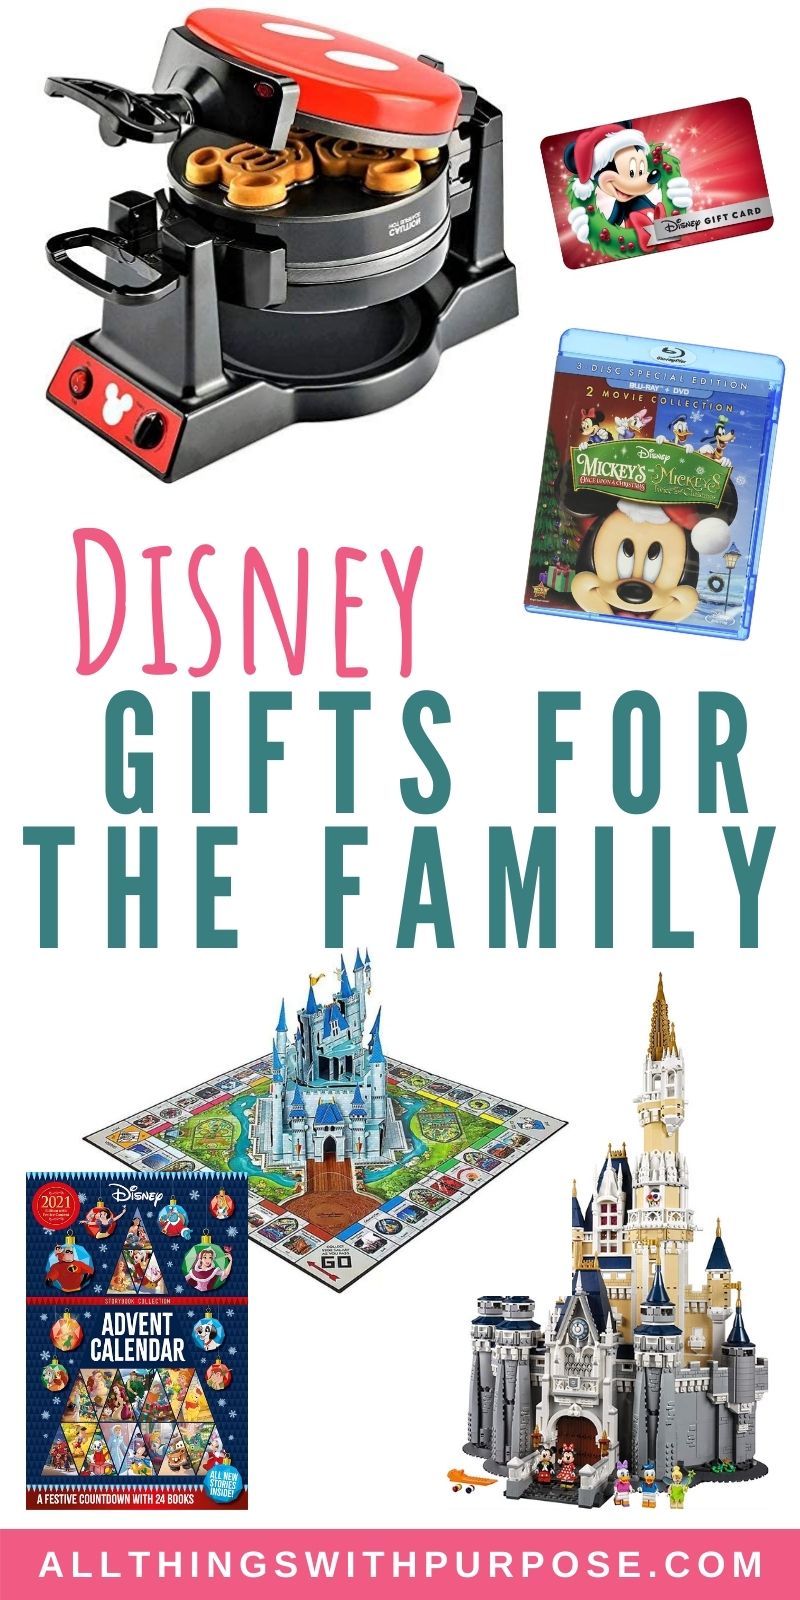 Gifts for Disney Lovers - Holiday Gift Guide 2022 – The Northern Prepster